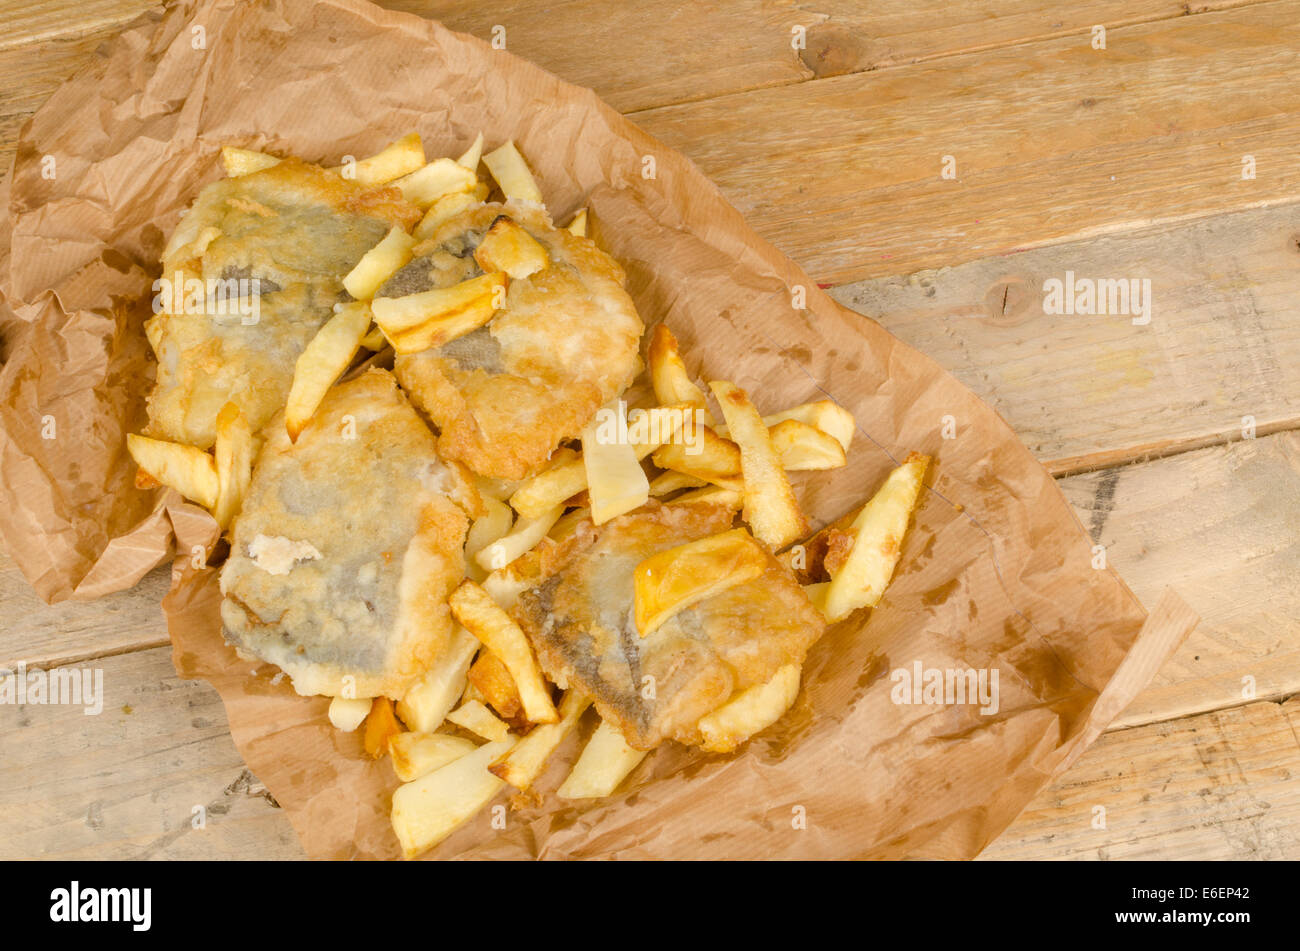 Traditional homemade fish and chips in a paper wrap Stock Photo ...